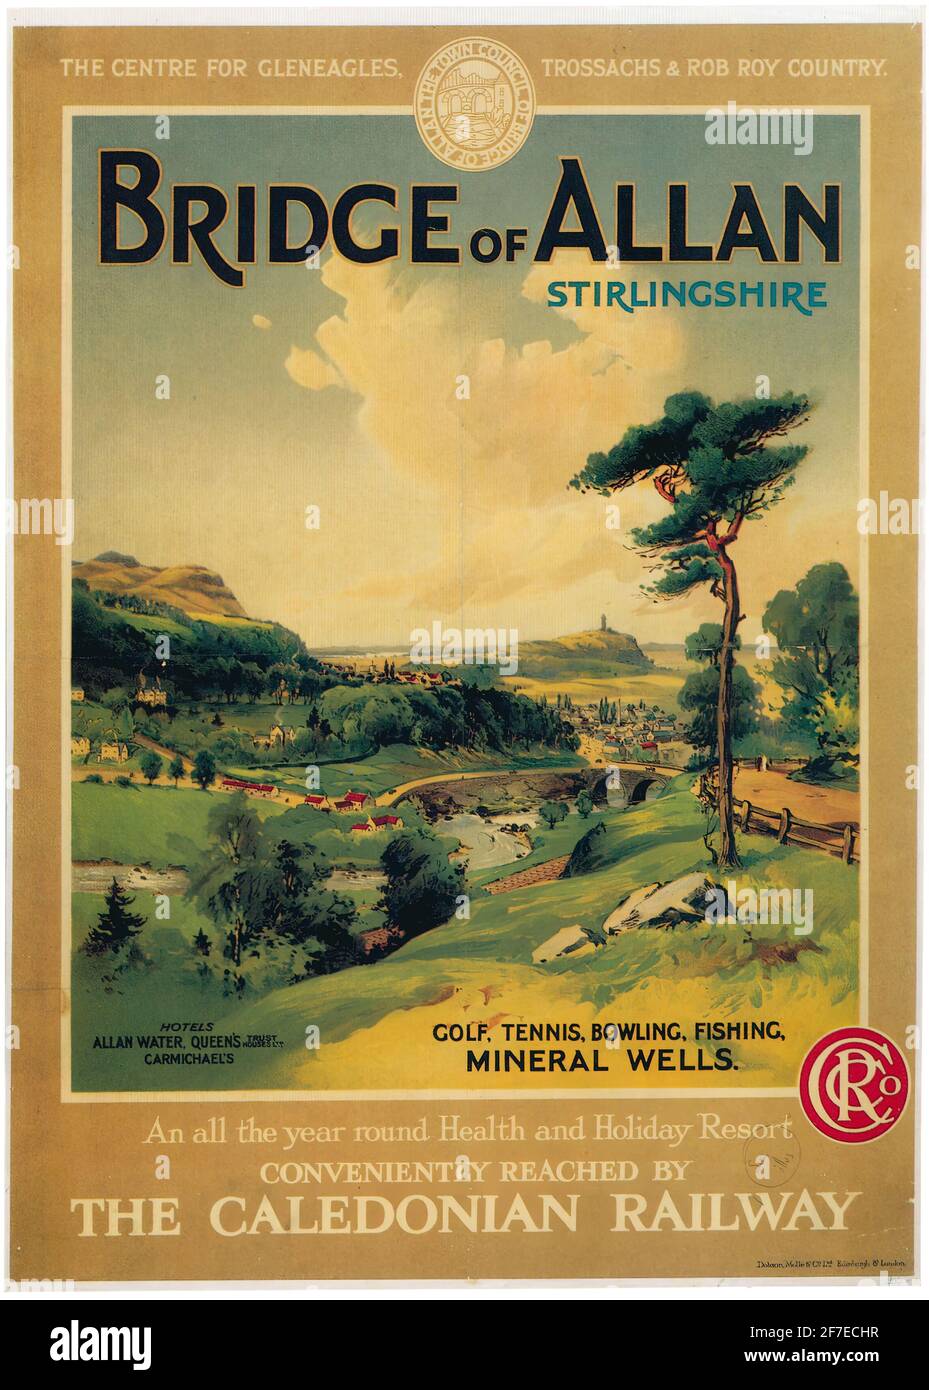 A vintage travel poster for the Bridge of Allan in Stirlingshire in Scotland on the Caledonian Railway Stock Photo